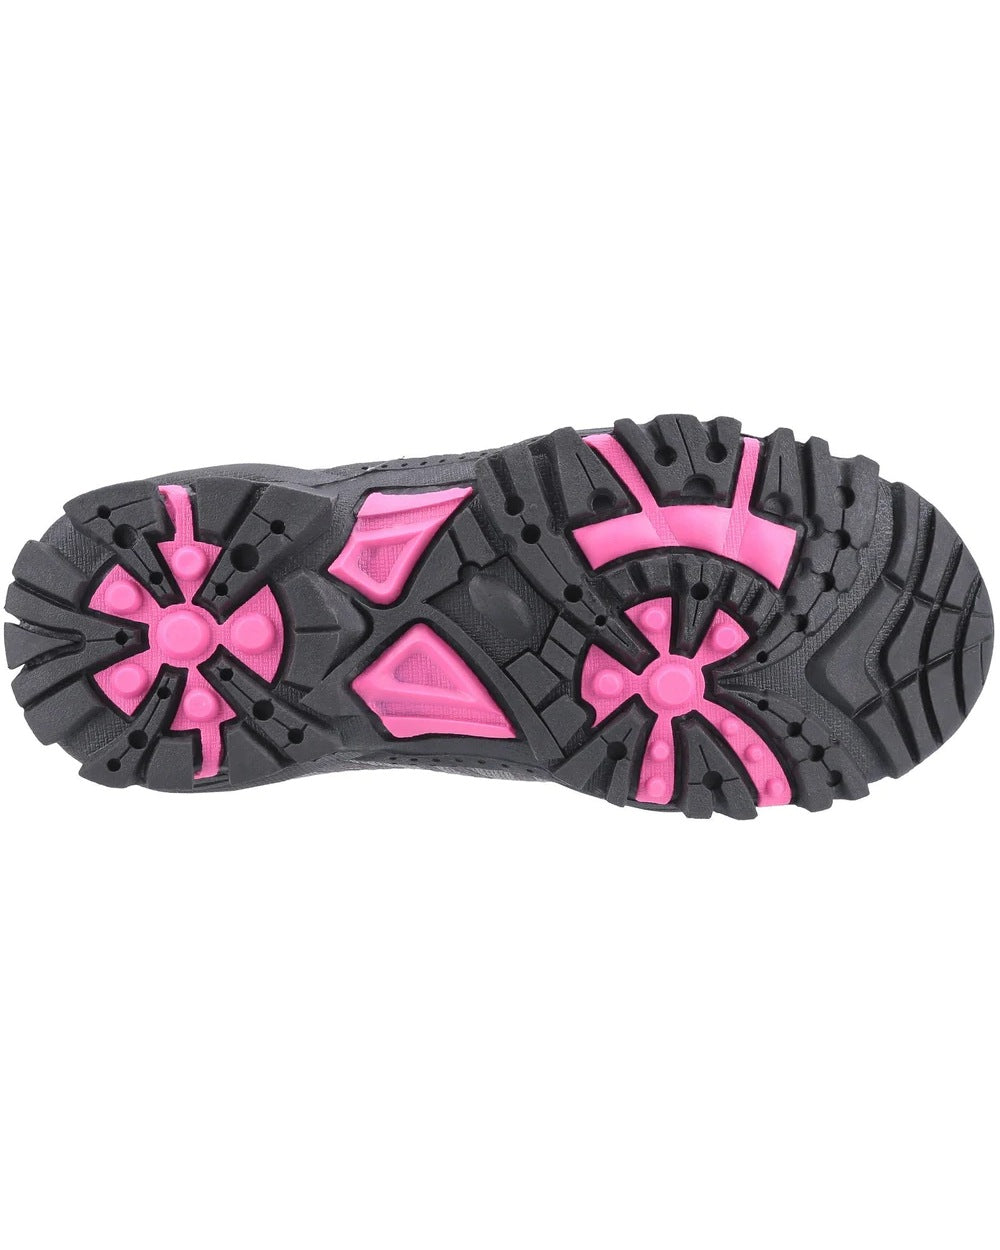 Cotswold Childrens Littledean Hiking Waterproof Shoes in Pink 